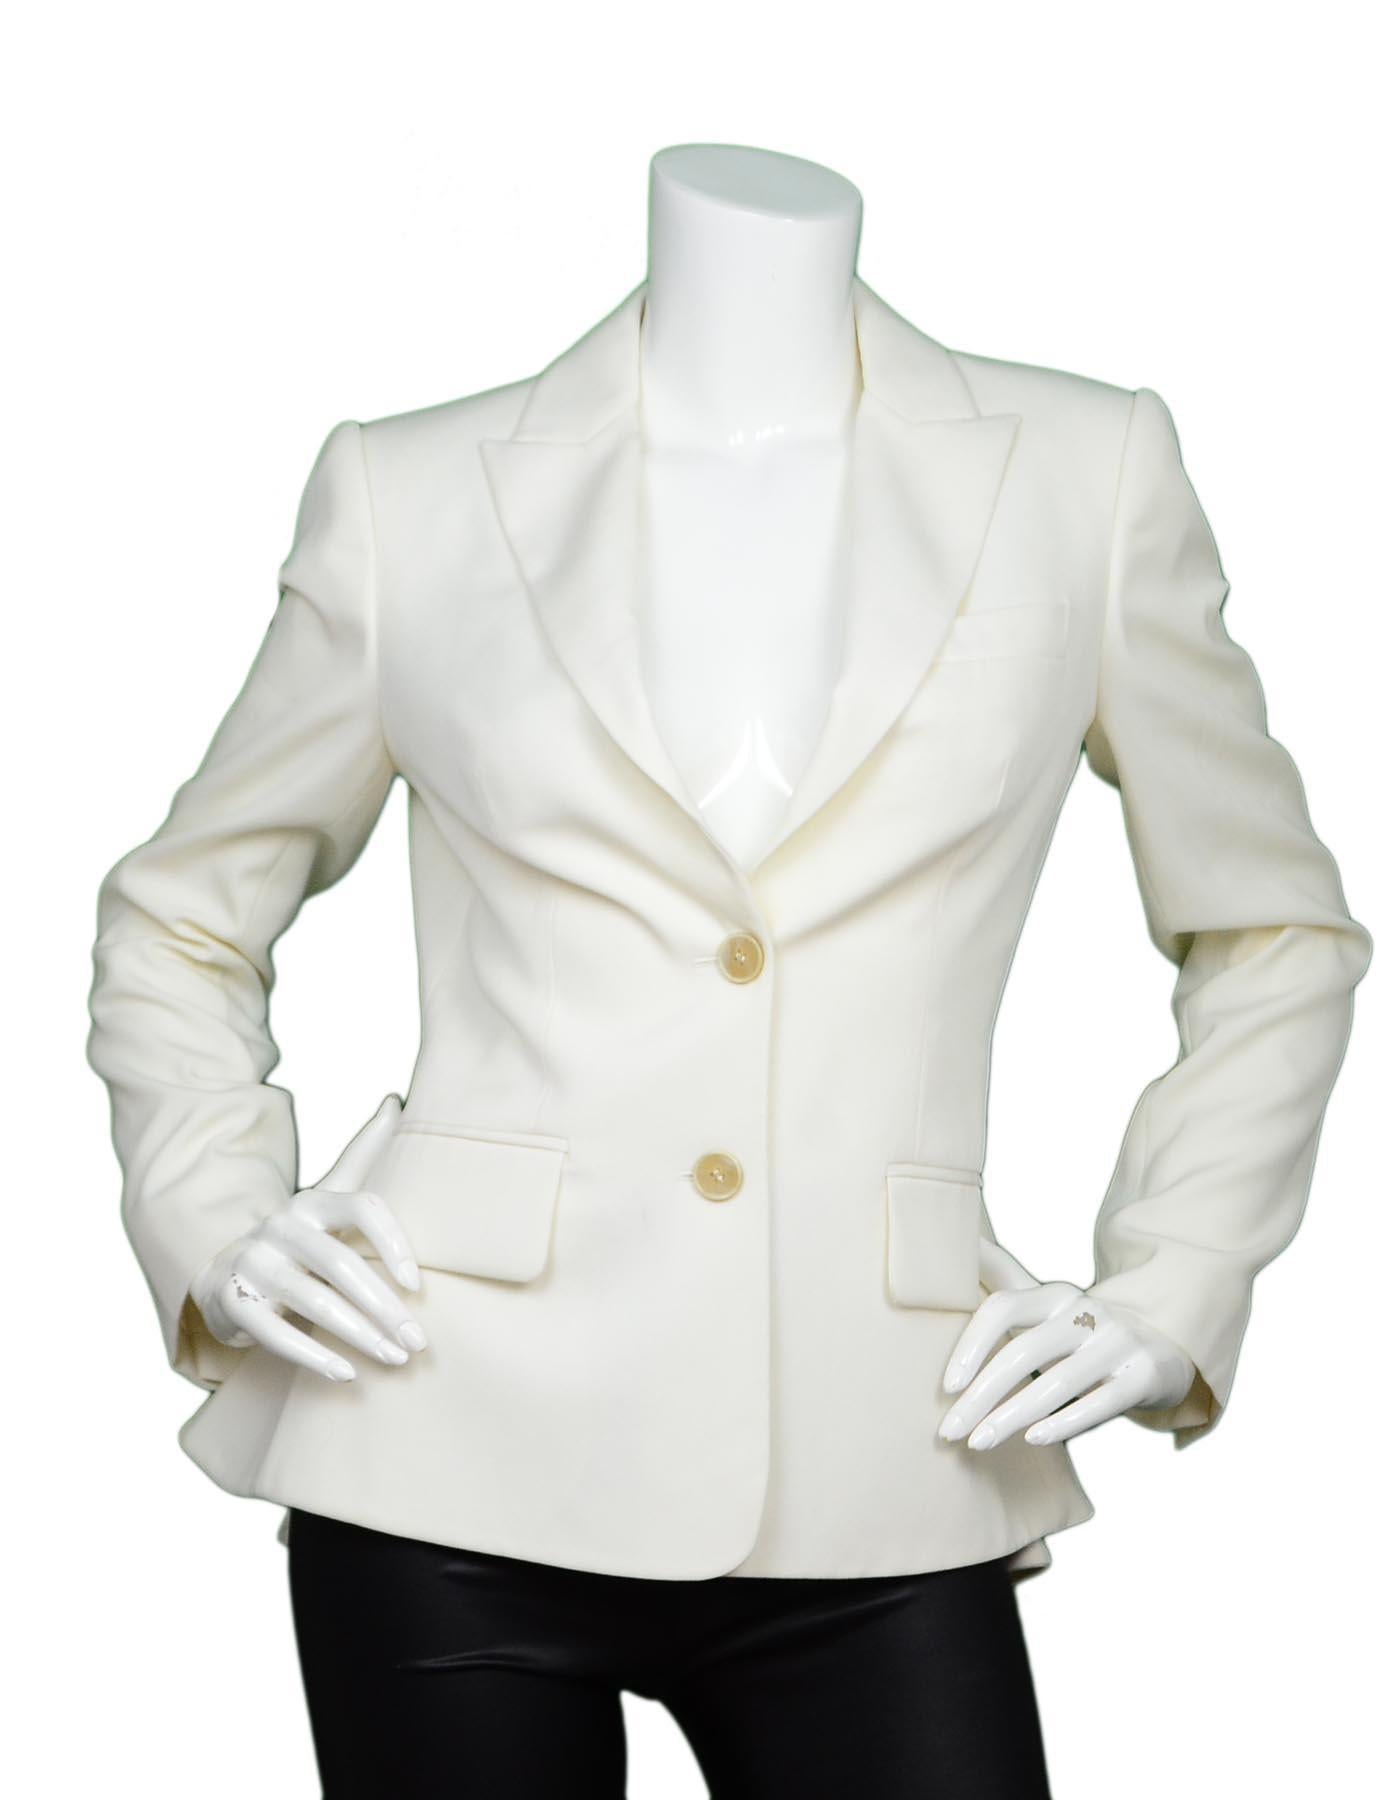 Alexander McQueen Cream Wool Jacket W/ Peplum Back Sz 40

Made In: Italy
Color: Cream
Materials: 100% wool
Lining: 100% cupro
Opening/Closure: Button front
Overall Condition: Very good pre-owned condition with exception of some